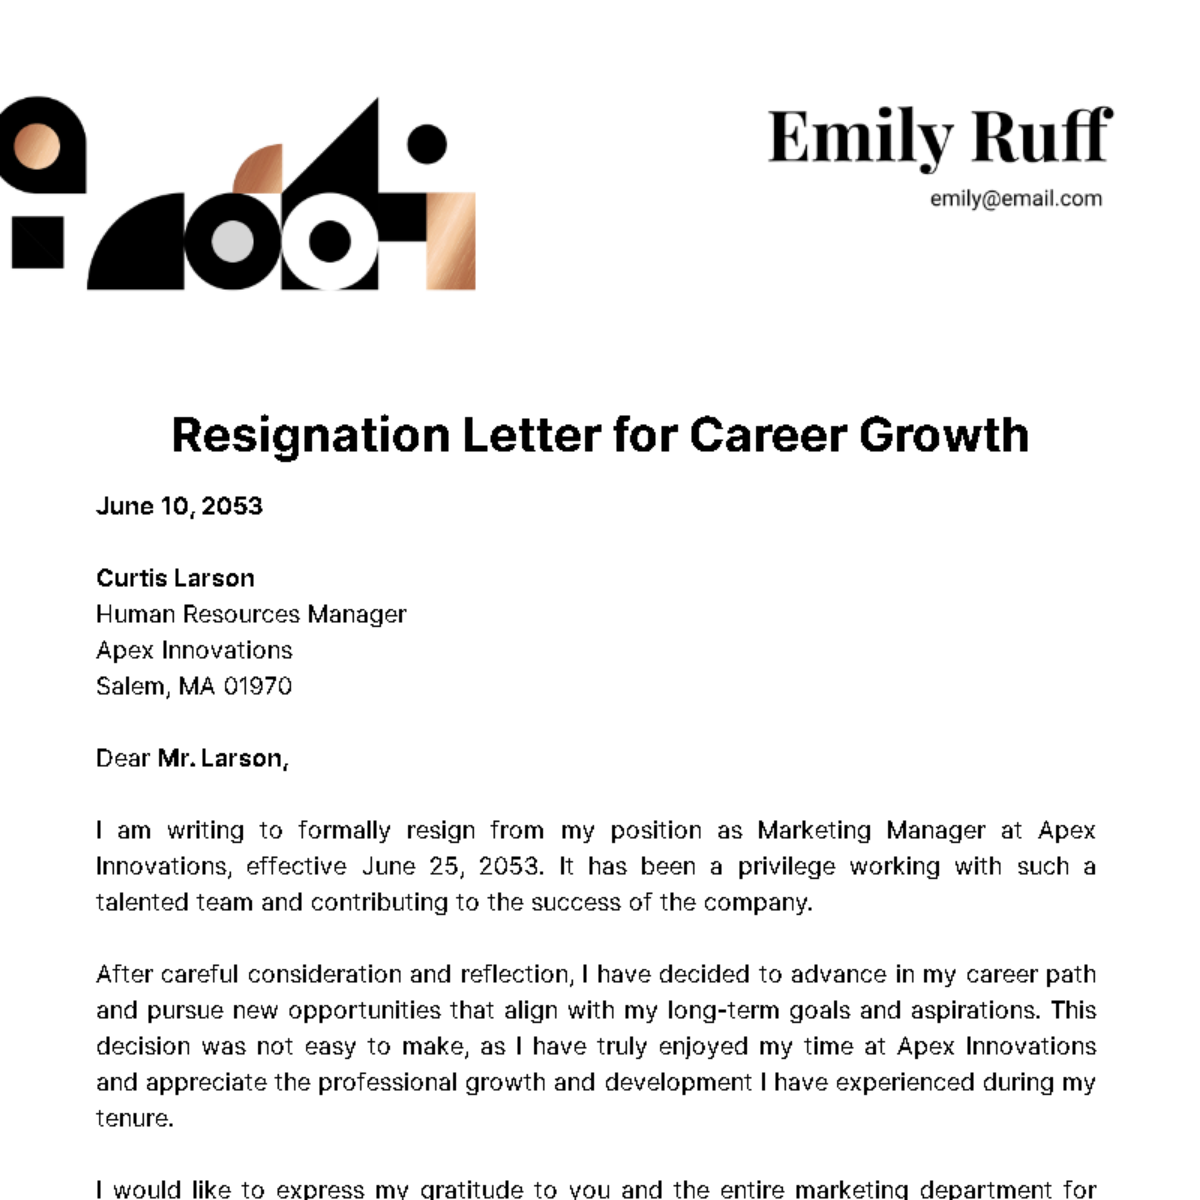 Resignation Letter for Career Growth Template